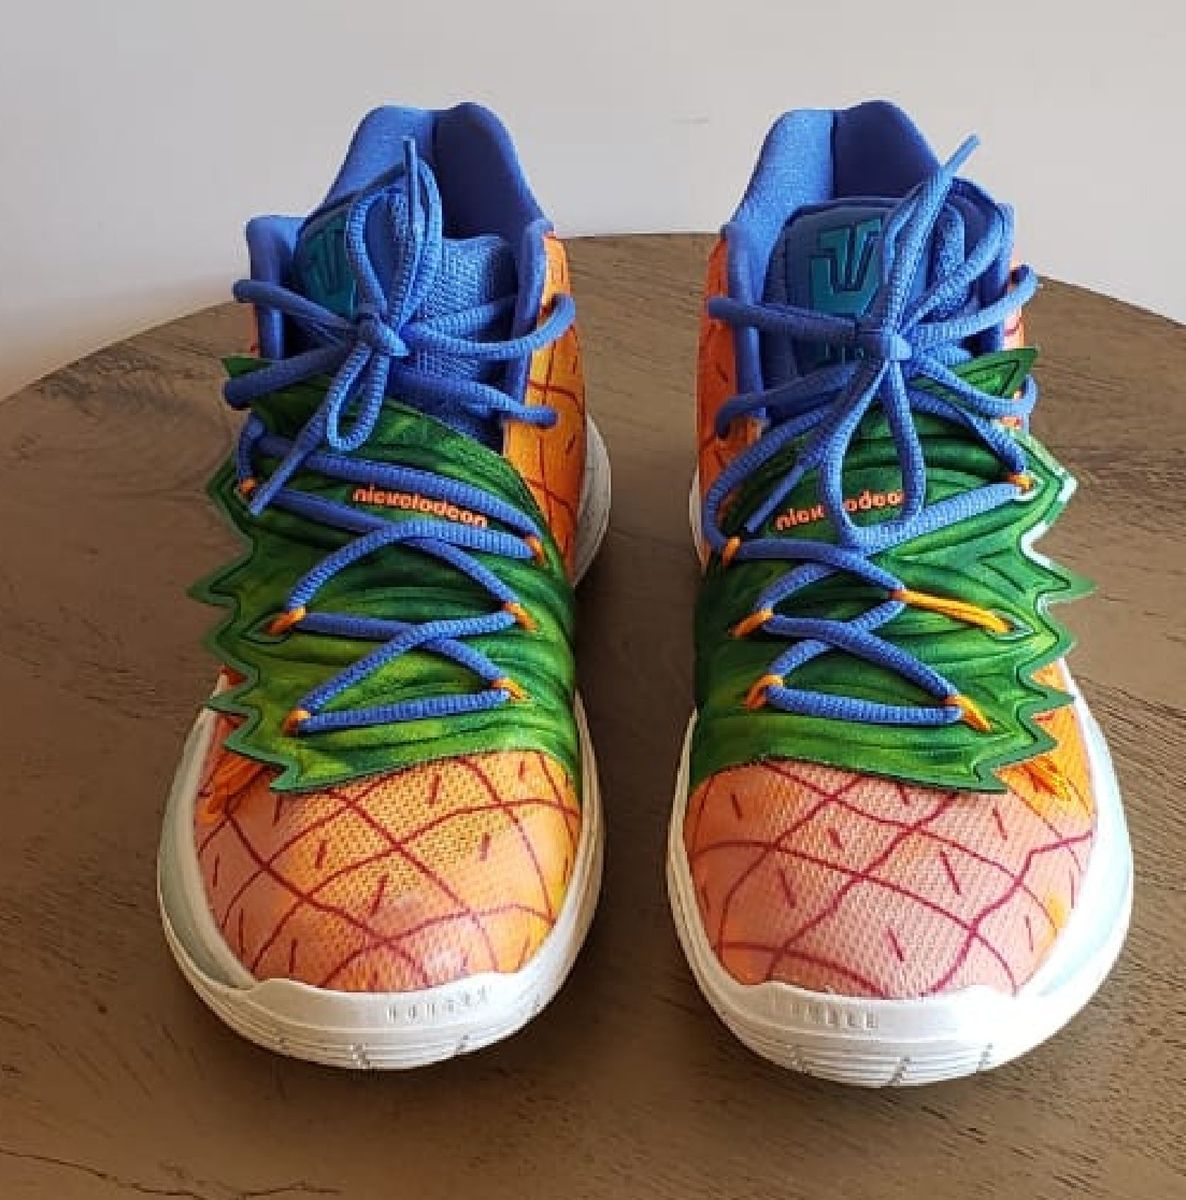 NIKE KYRIE 5 'TACO' PE WE GOT A PAIR FOR YouTube